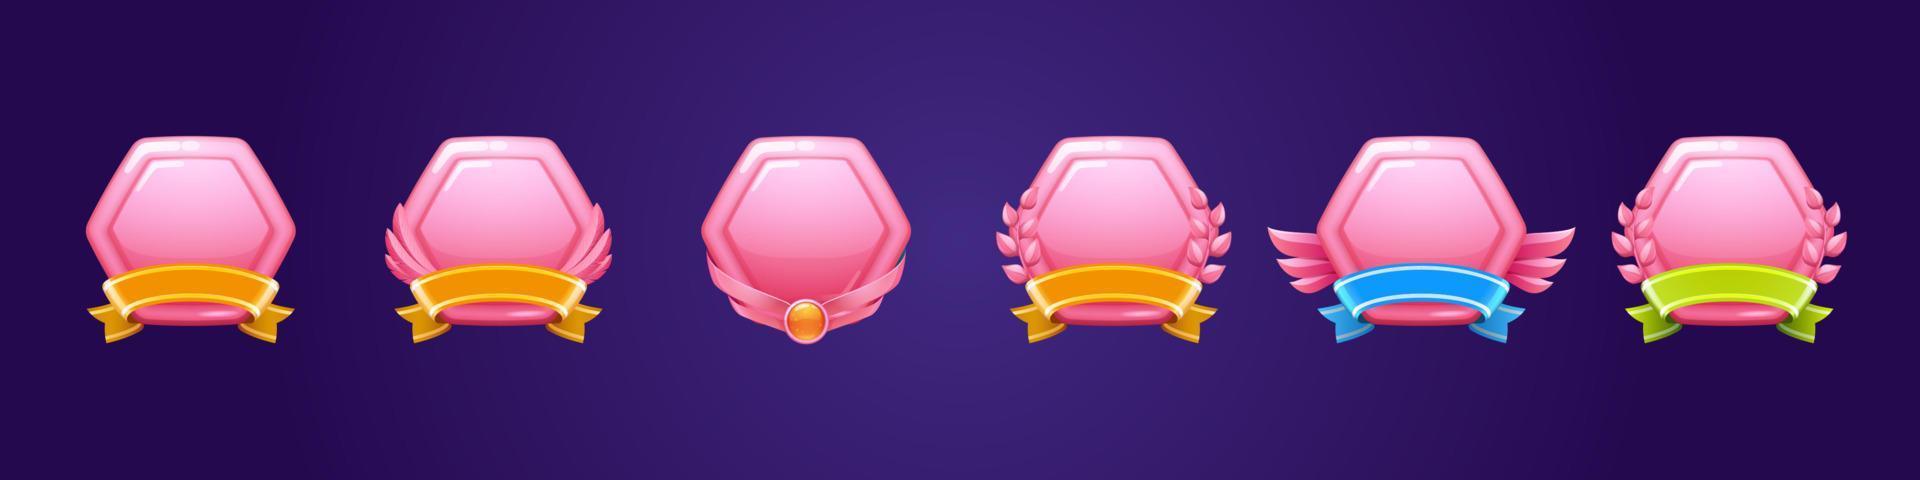 Glossy pink award badges for win in game vector